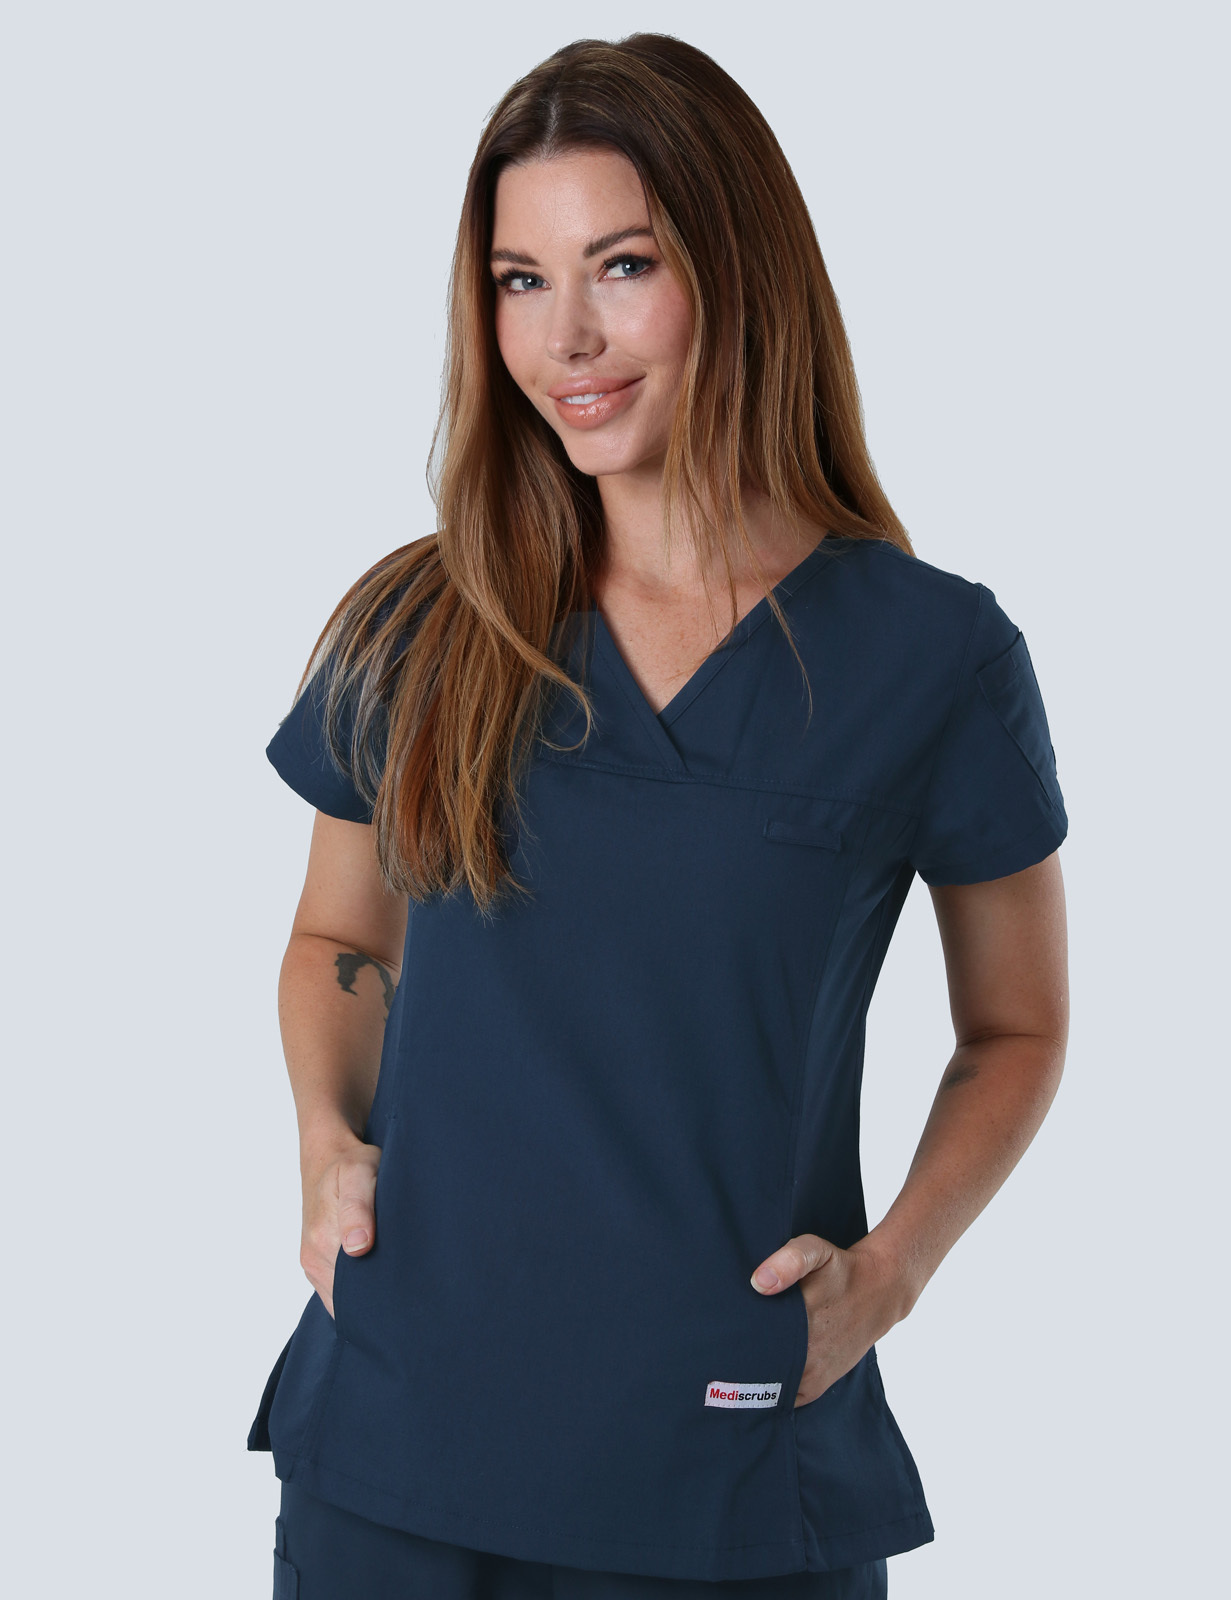 Dandenong Outpatient - Nurse (Women's Fit Solid Scrub Top in Navy incl Logos)